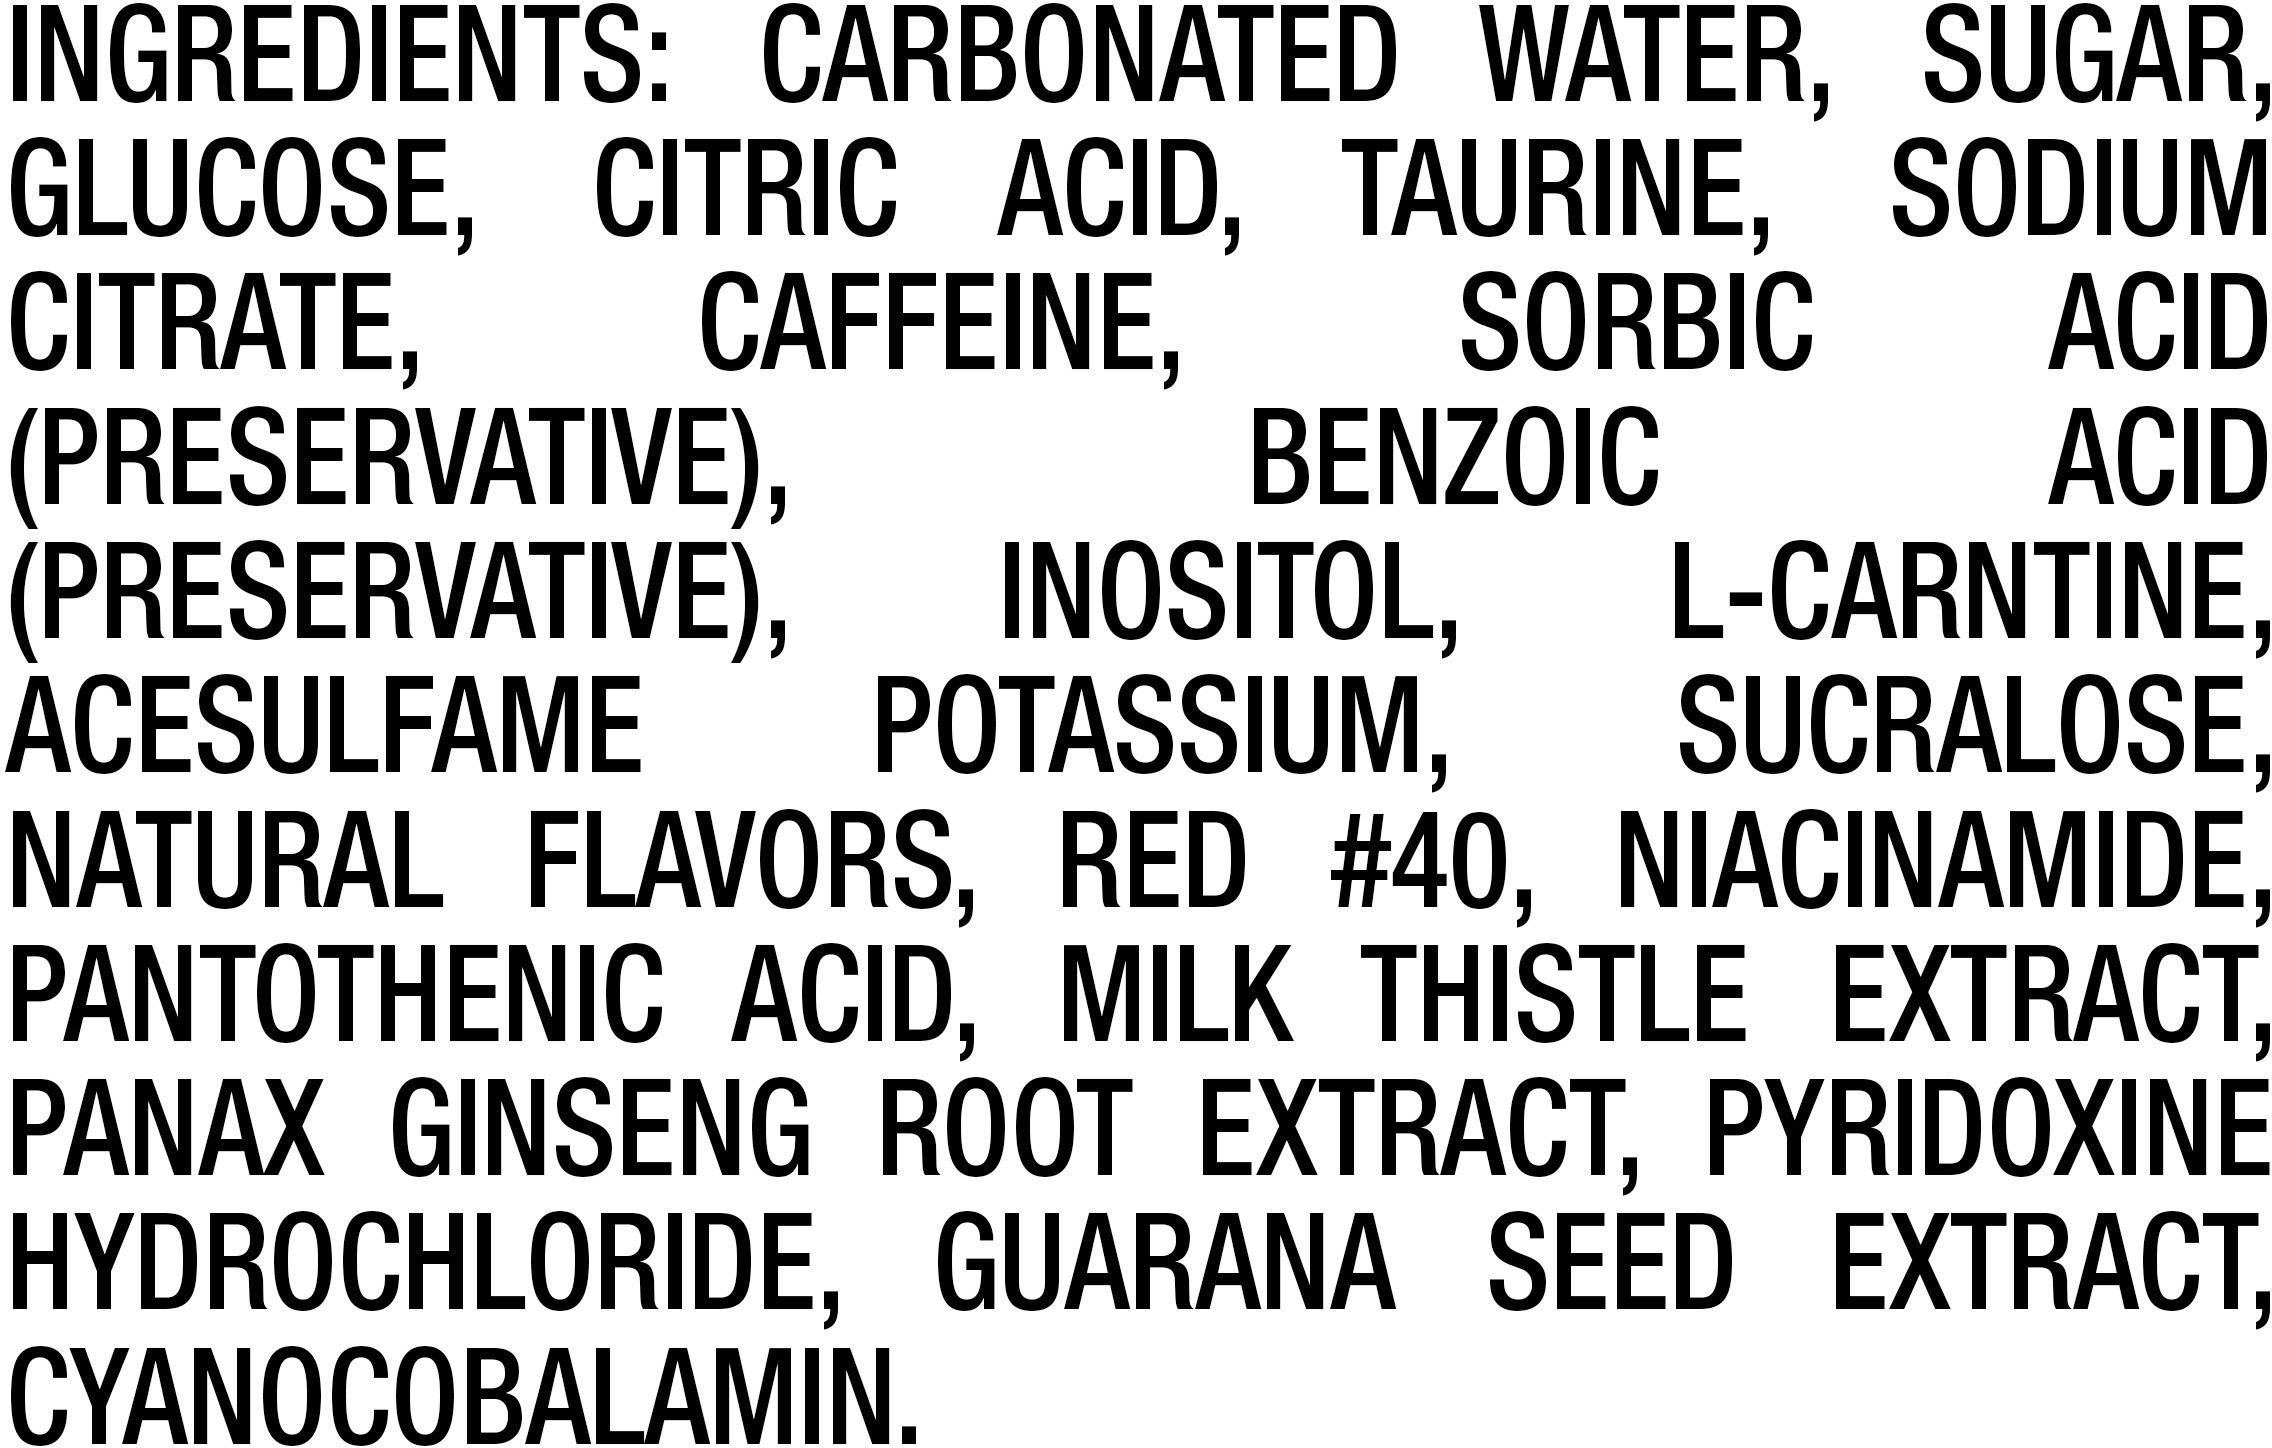 Image describing nutrition information for product Rockstar Punched